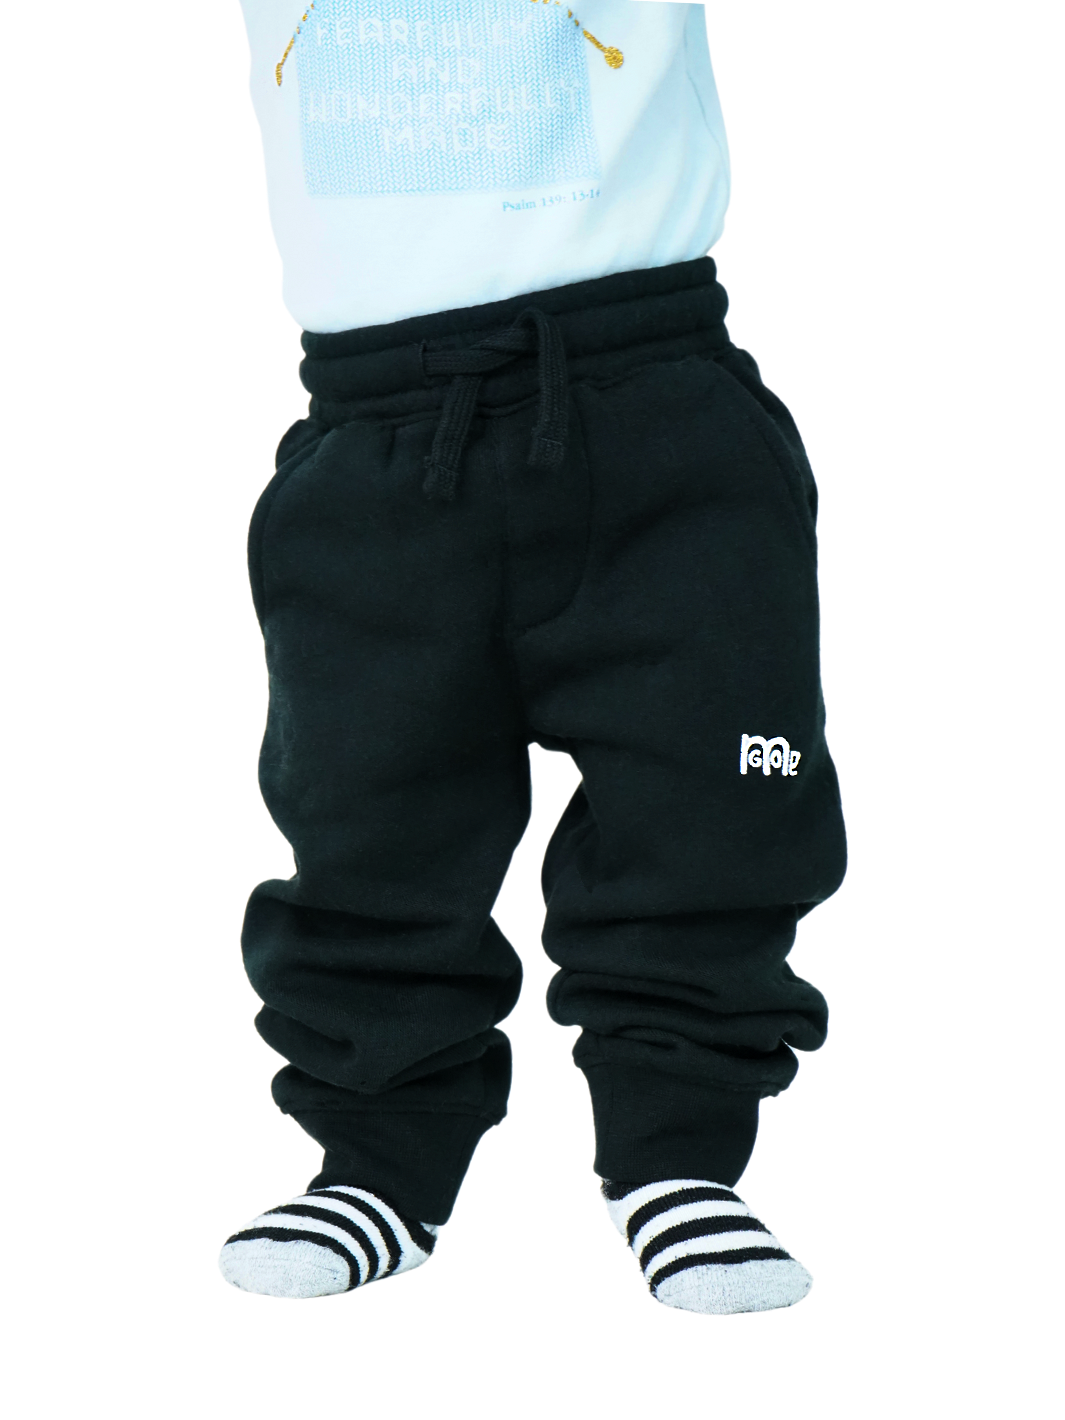 Toddler size Black  jogger Sweatpants with elastic waistband, sewn fly detail, jersey-lined front pockets, stylish back pocket, and White GODinme logo.